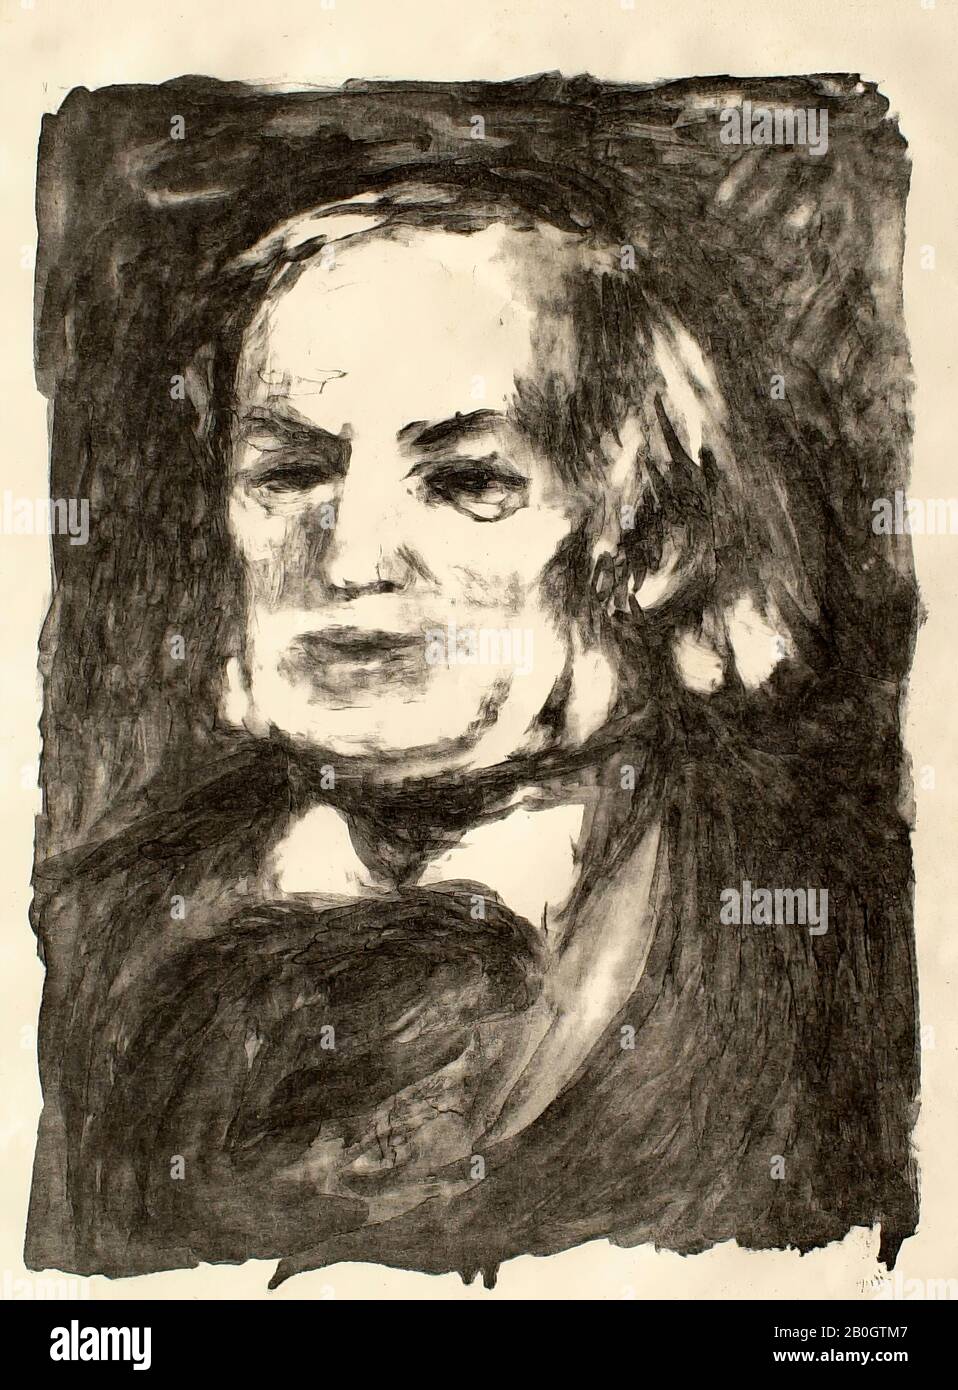 Pierre-Auguste Renoir, French, 1841–1919, Portrait of Richard Wagner, c. 1900, Lithograph on paper, image: 16 7/8 x 12 5/8 in. (42.8 x 32 cm Stock Photo